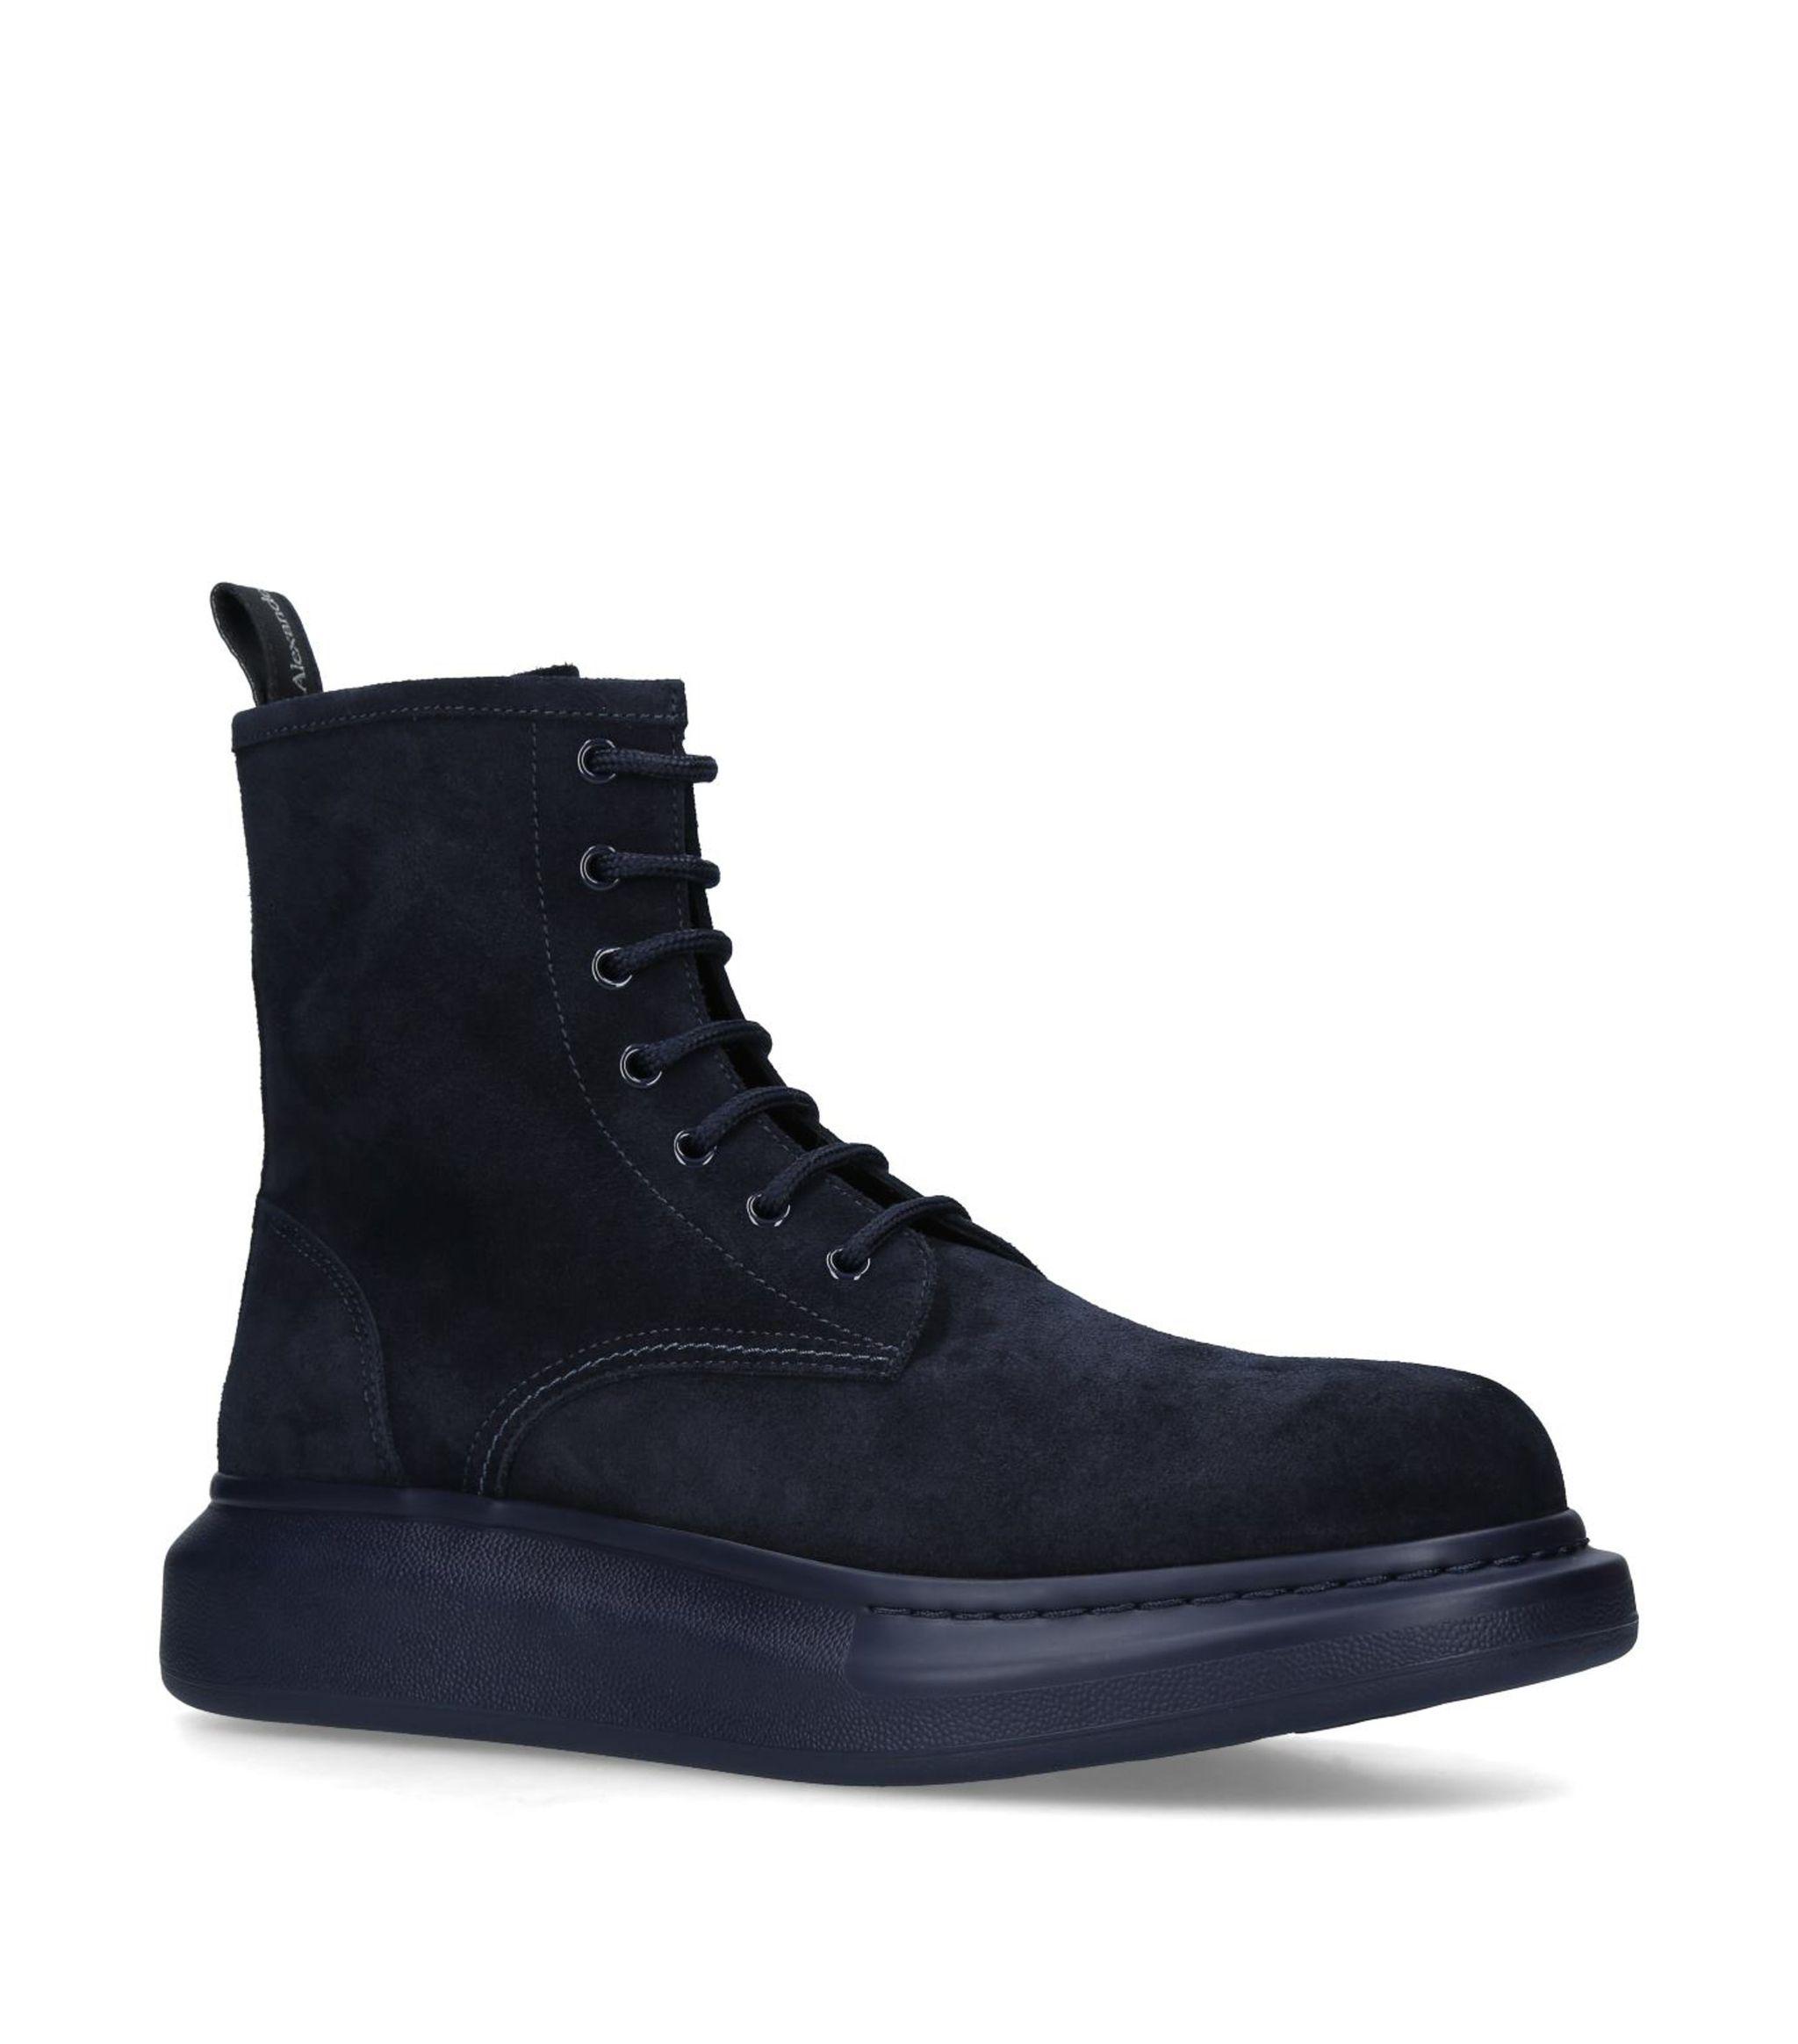 Alexander McQueen Suede Hybrid Lace-up Boots in Blue for Men - Lyst